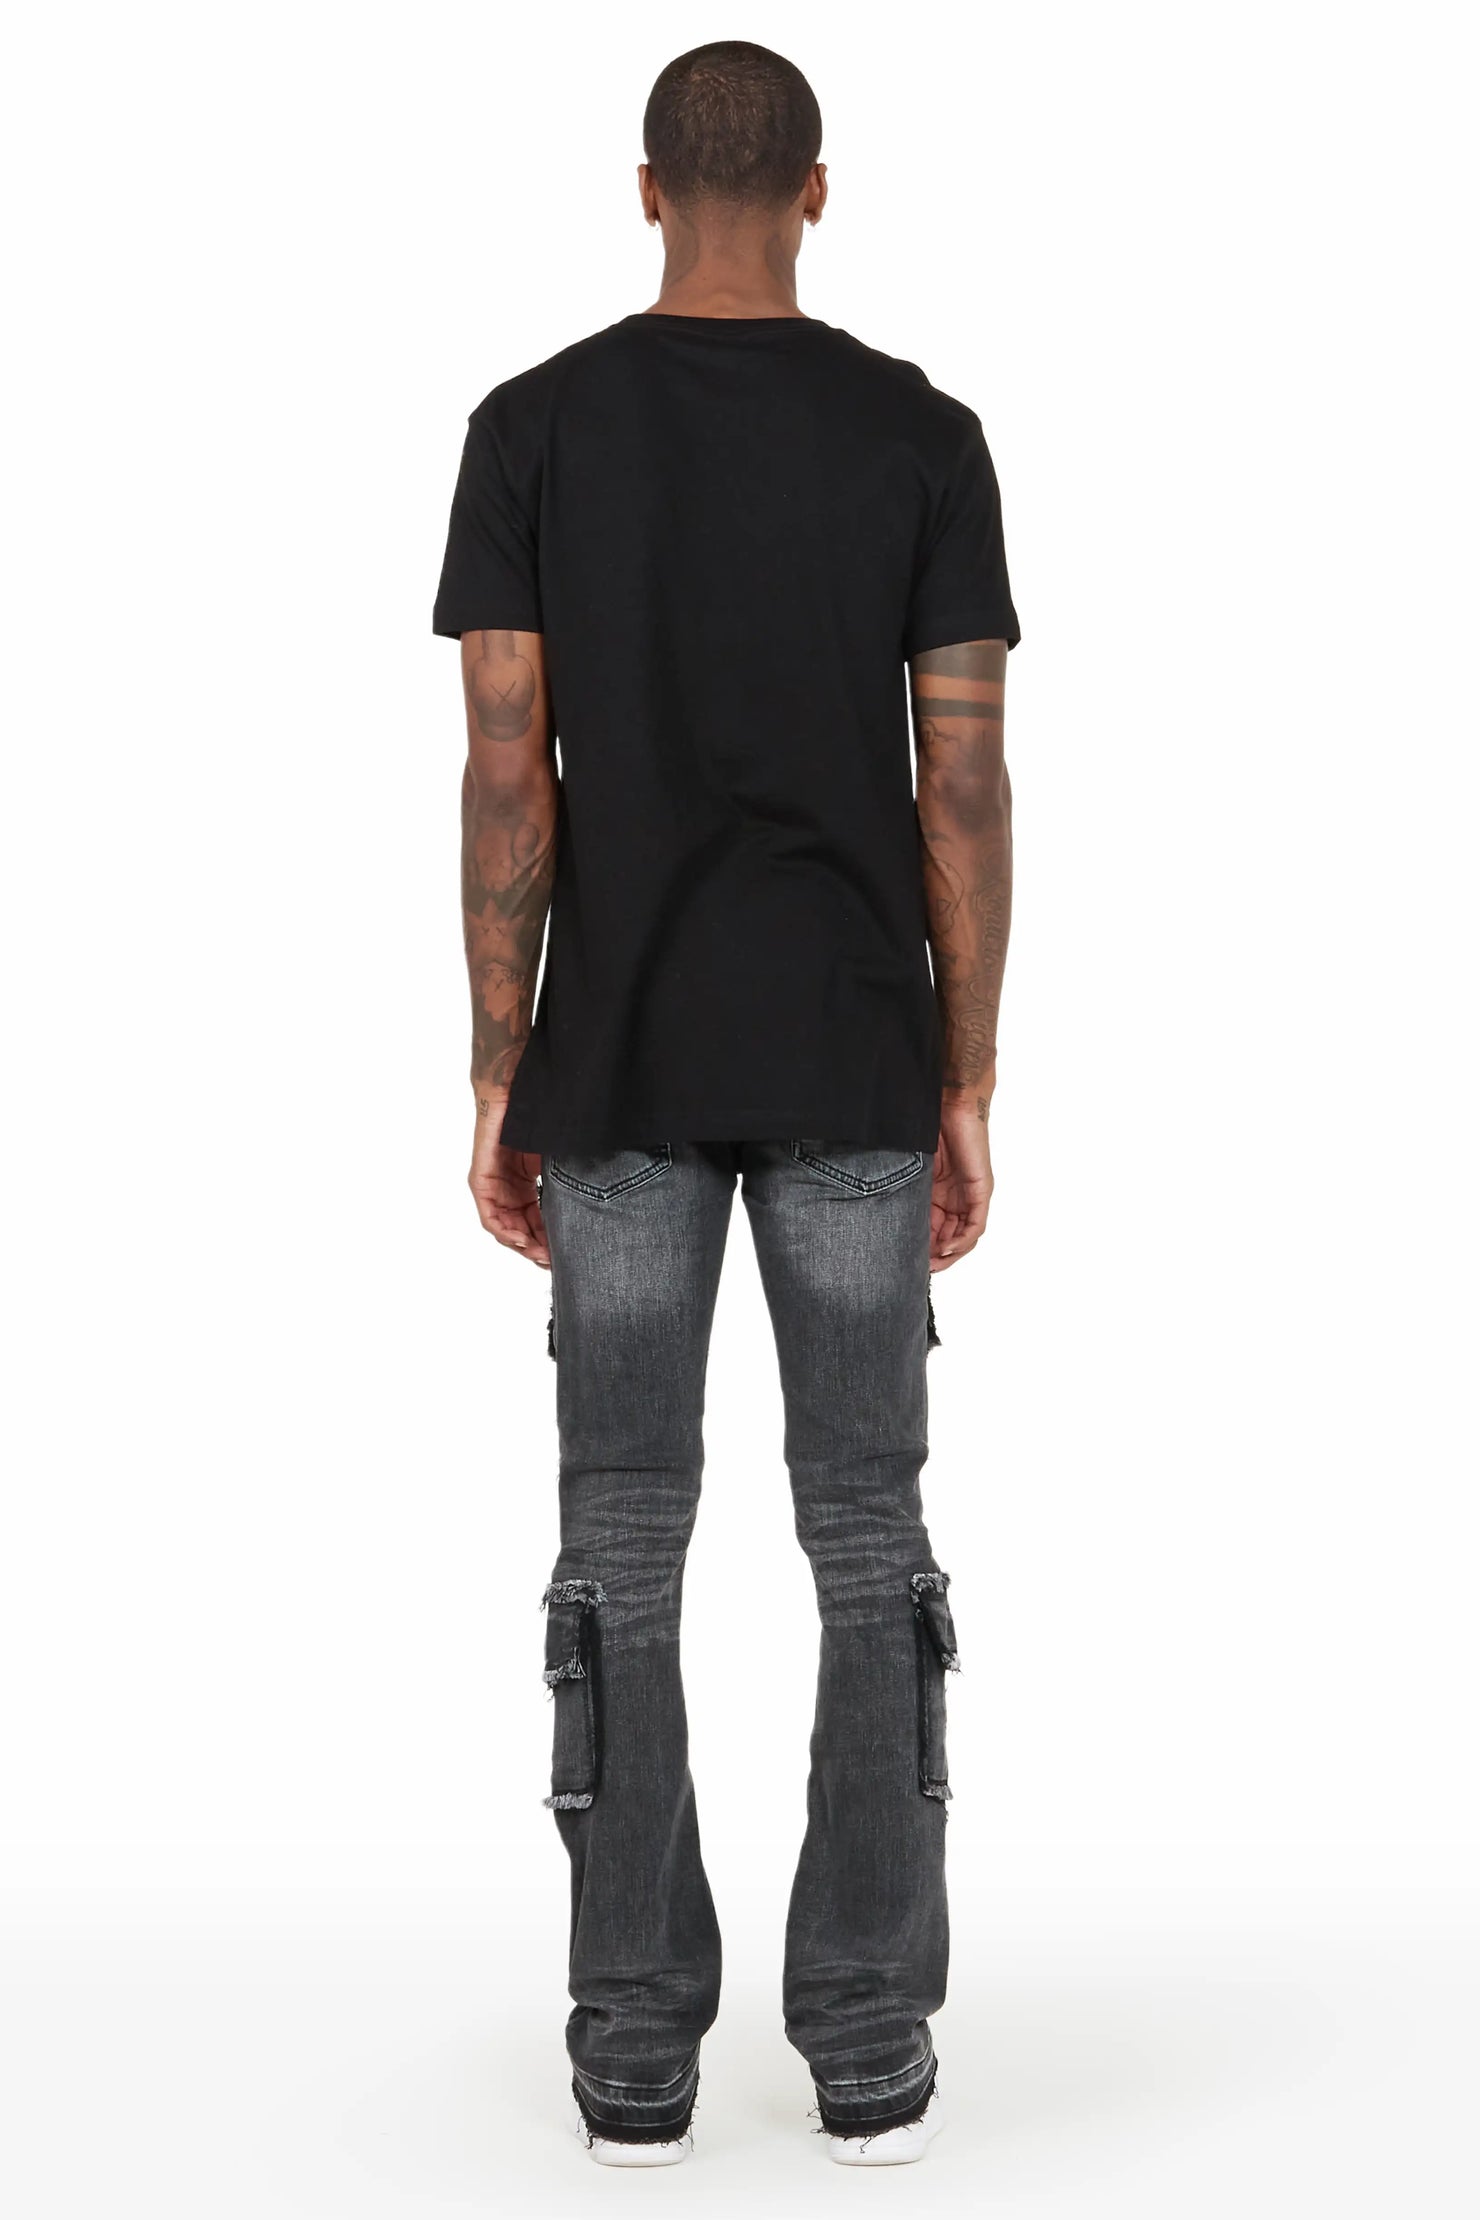 Tyrell Grey Wash Stacked Flare Cargo Jean